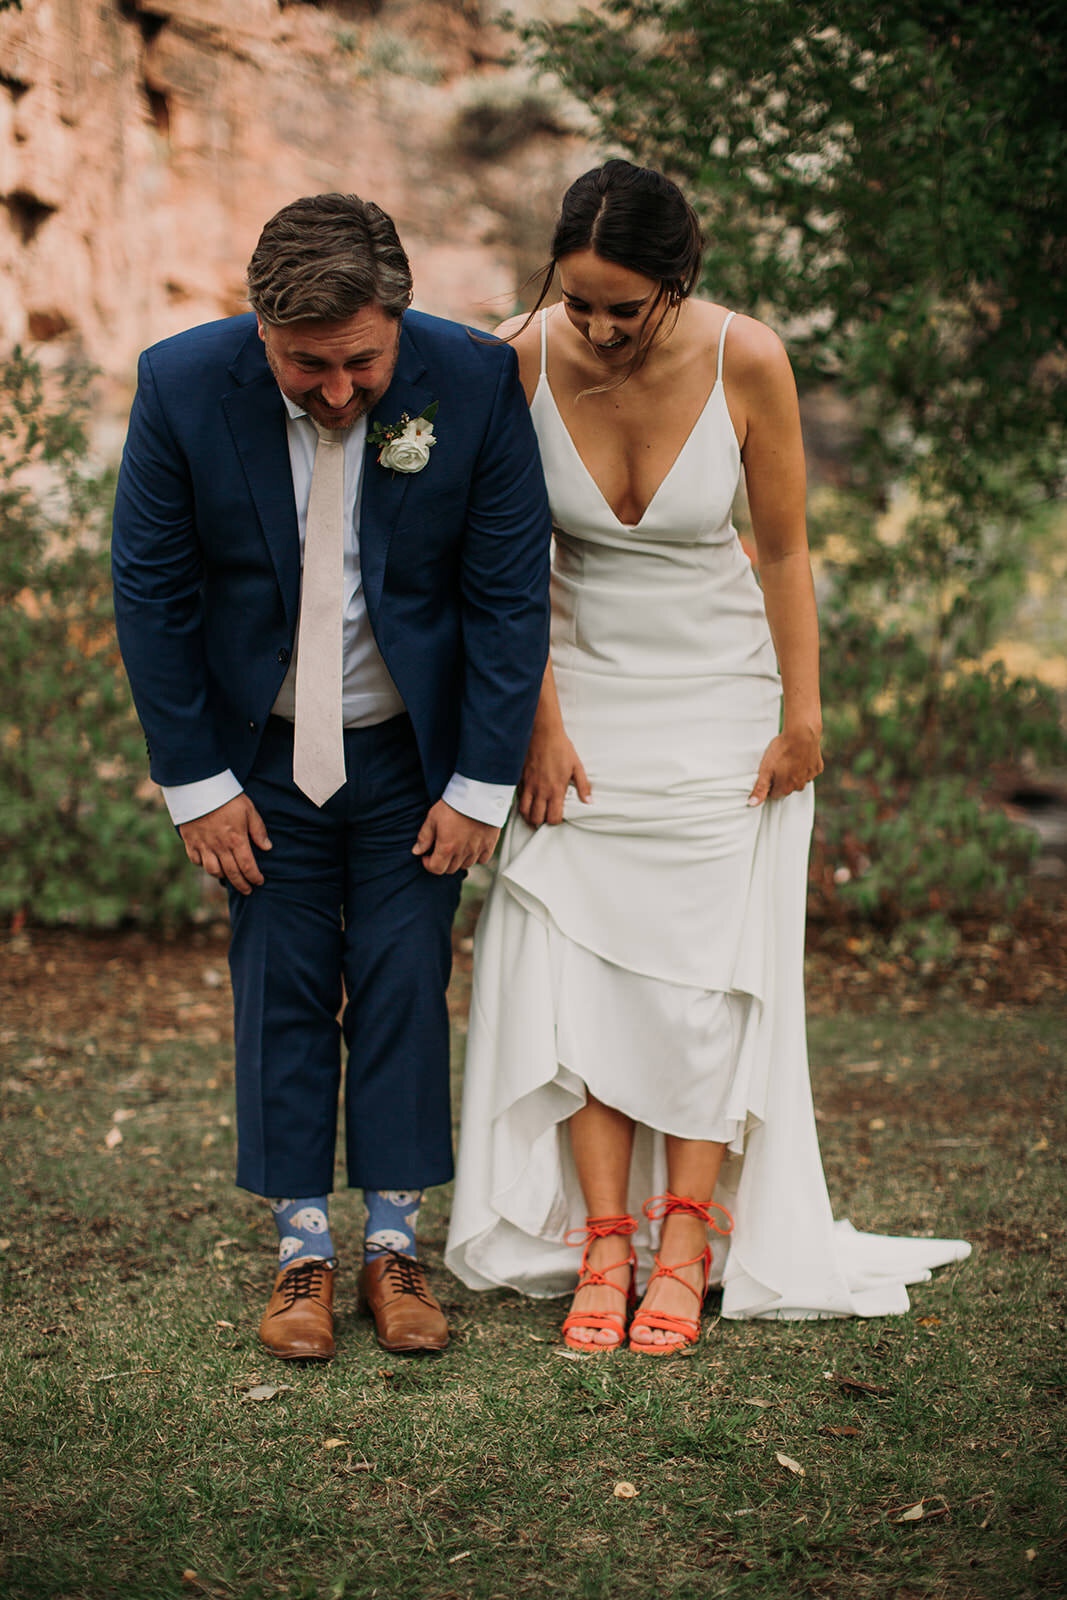 A bride and groom standing next to each other as they lift up their outfits to show off their shoes.